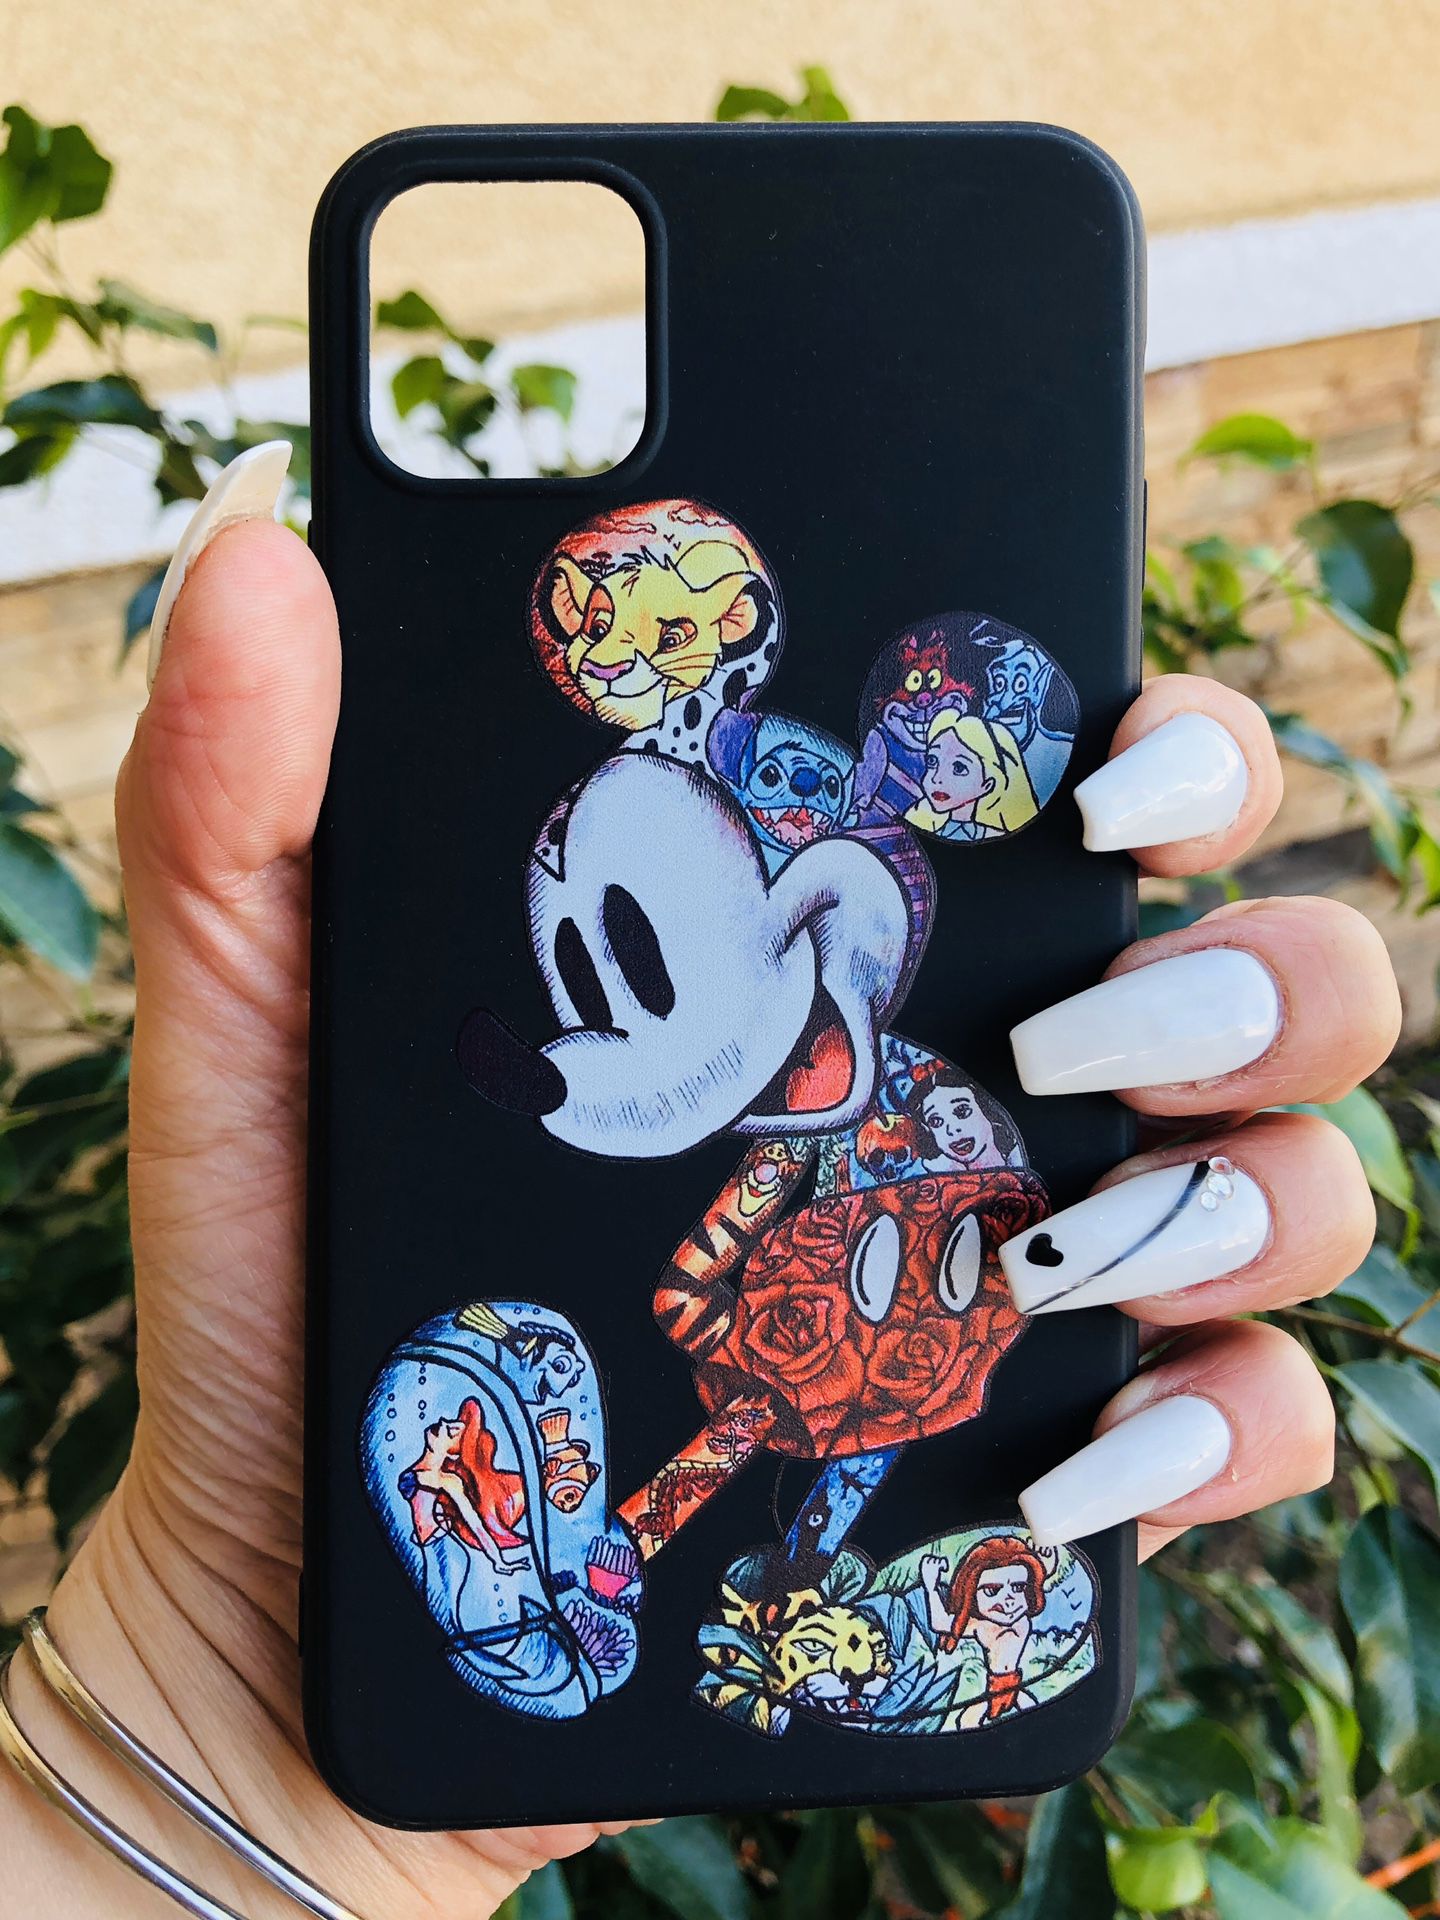 Brand new cool iphone 11 PRO MAX case cover phone case rubber Mickey Mouse cute pretty girls womens disneyland disney cartoon